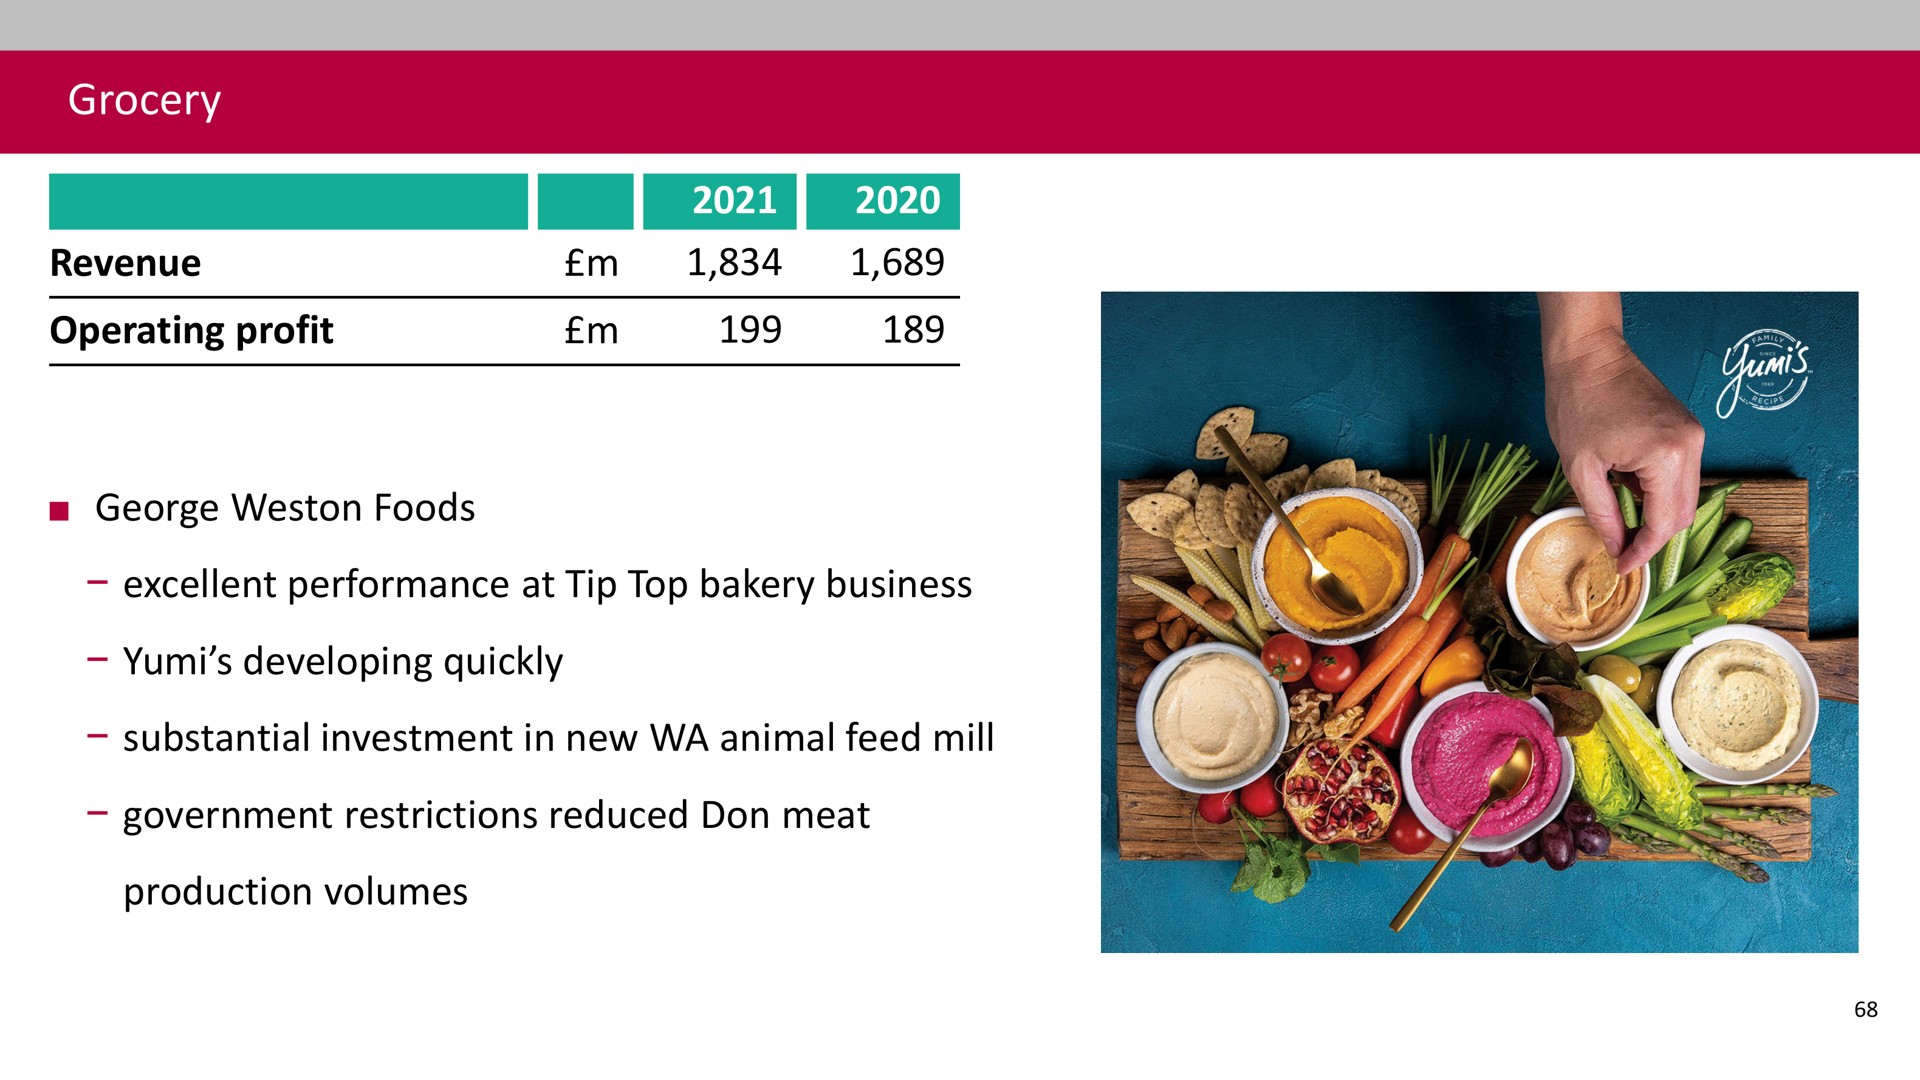 grocery revenue operating profit foods excellent performance at tip top bakery business developing quickly substantial investment in new animal feed mill government restrictions reduced don meat production volumes | Associated British Foods